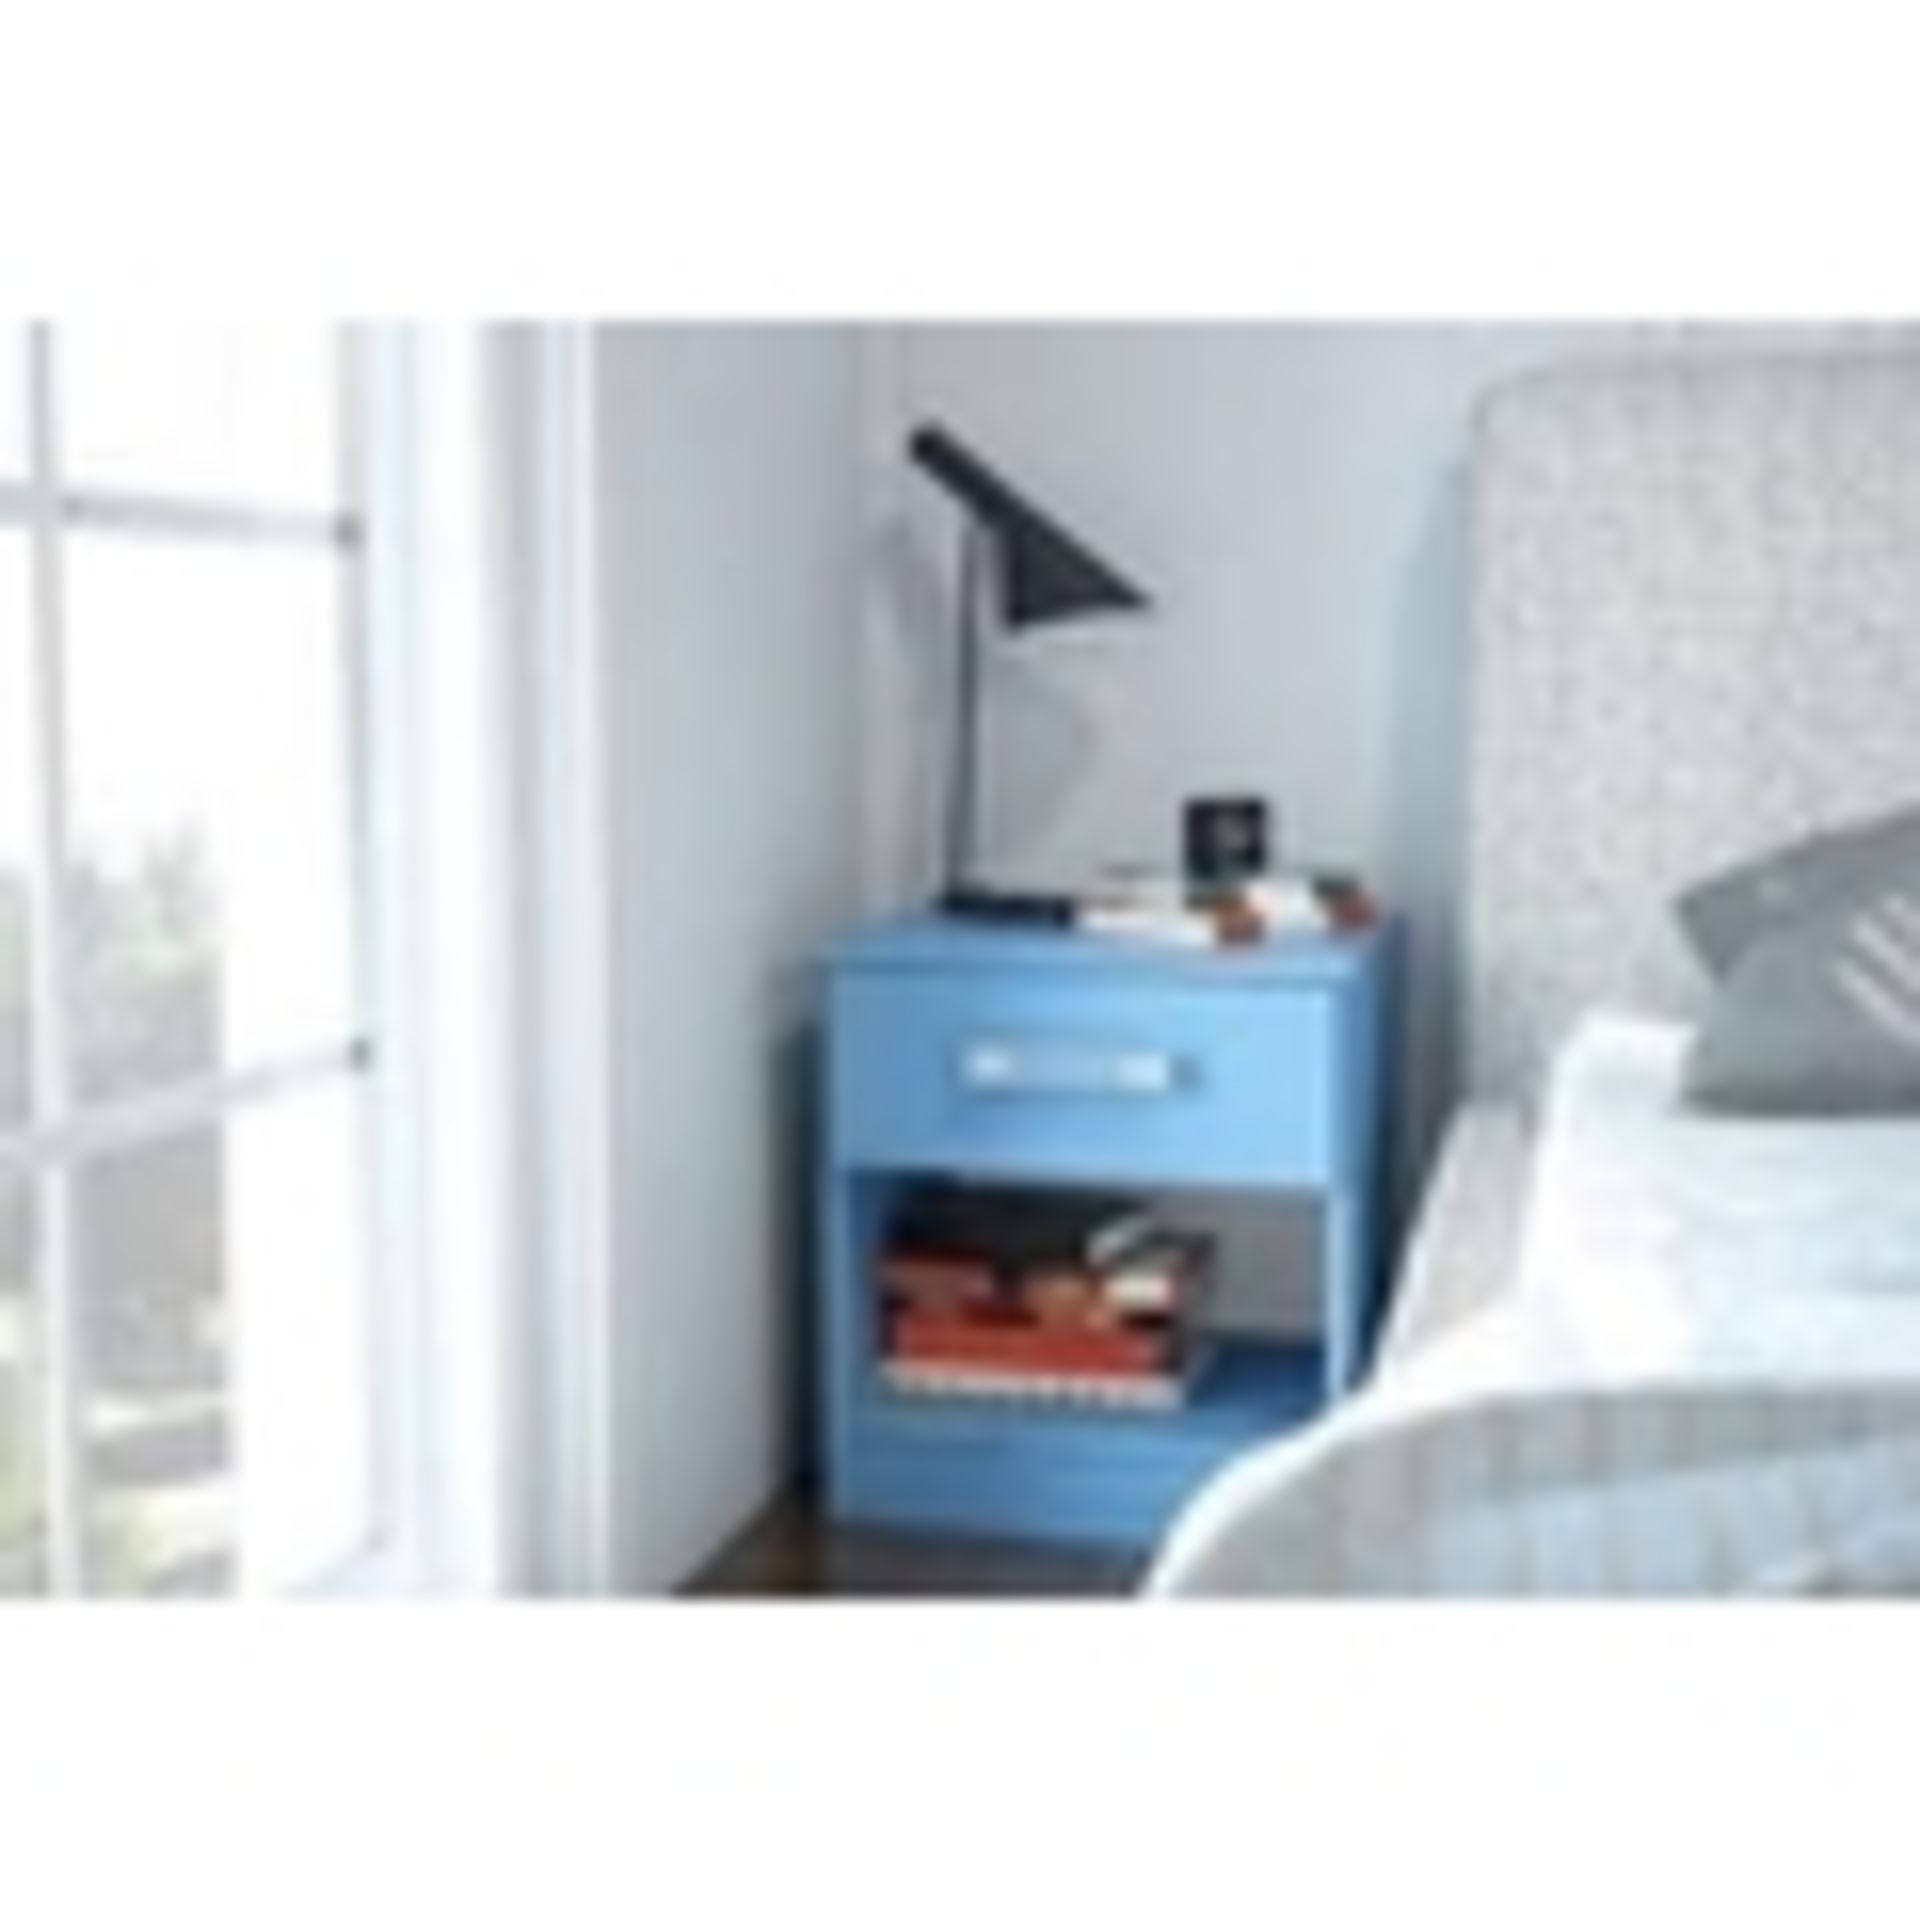 1 BRAND NEW BOXED REFLECT BLUE 1 DRAWER BEDSIDE CABINET